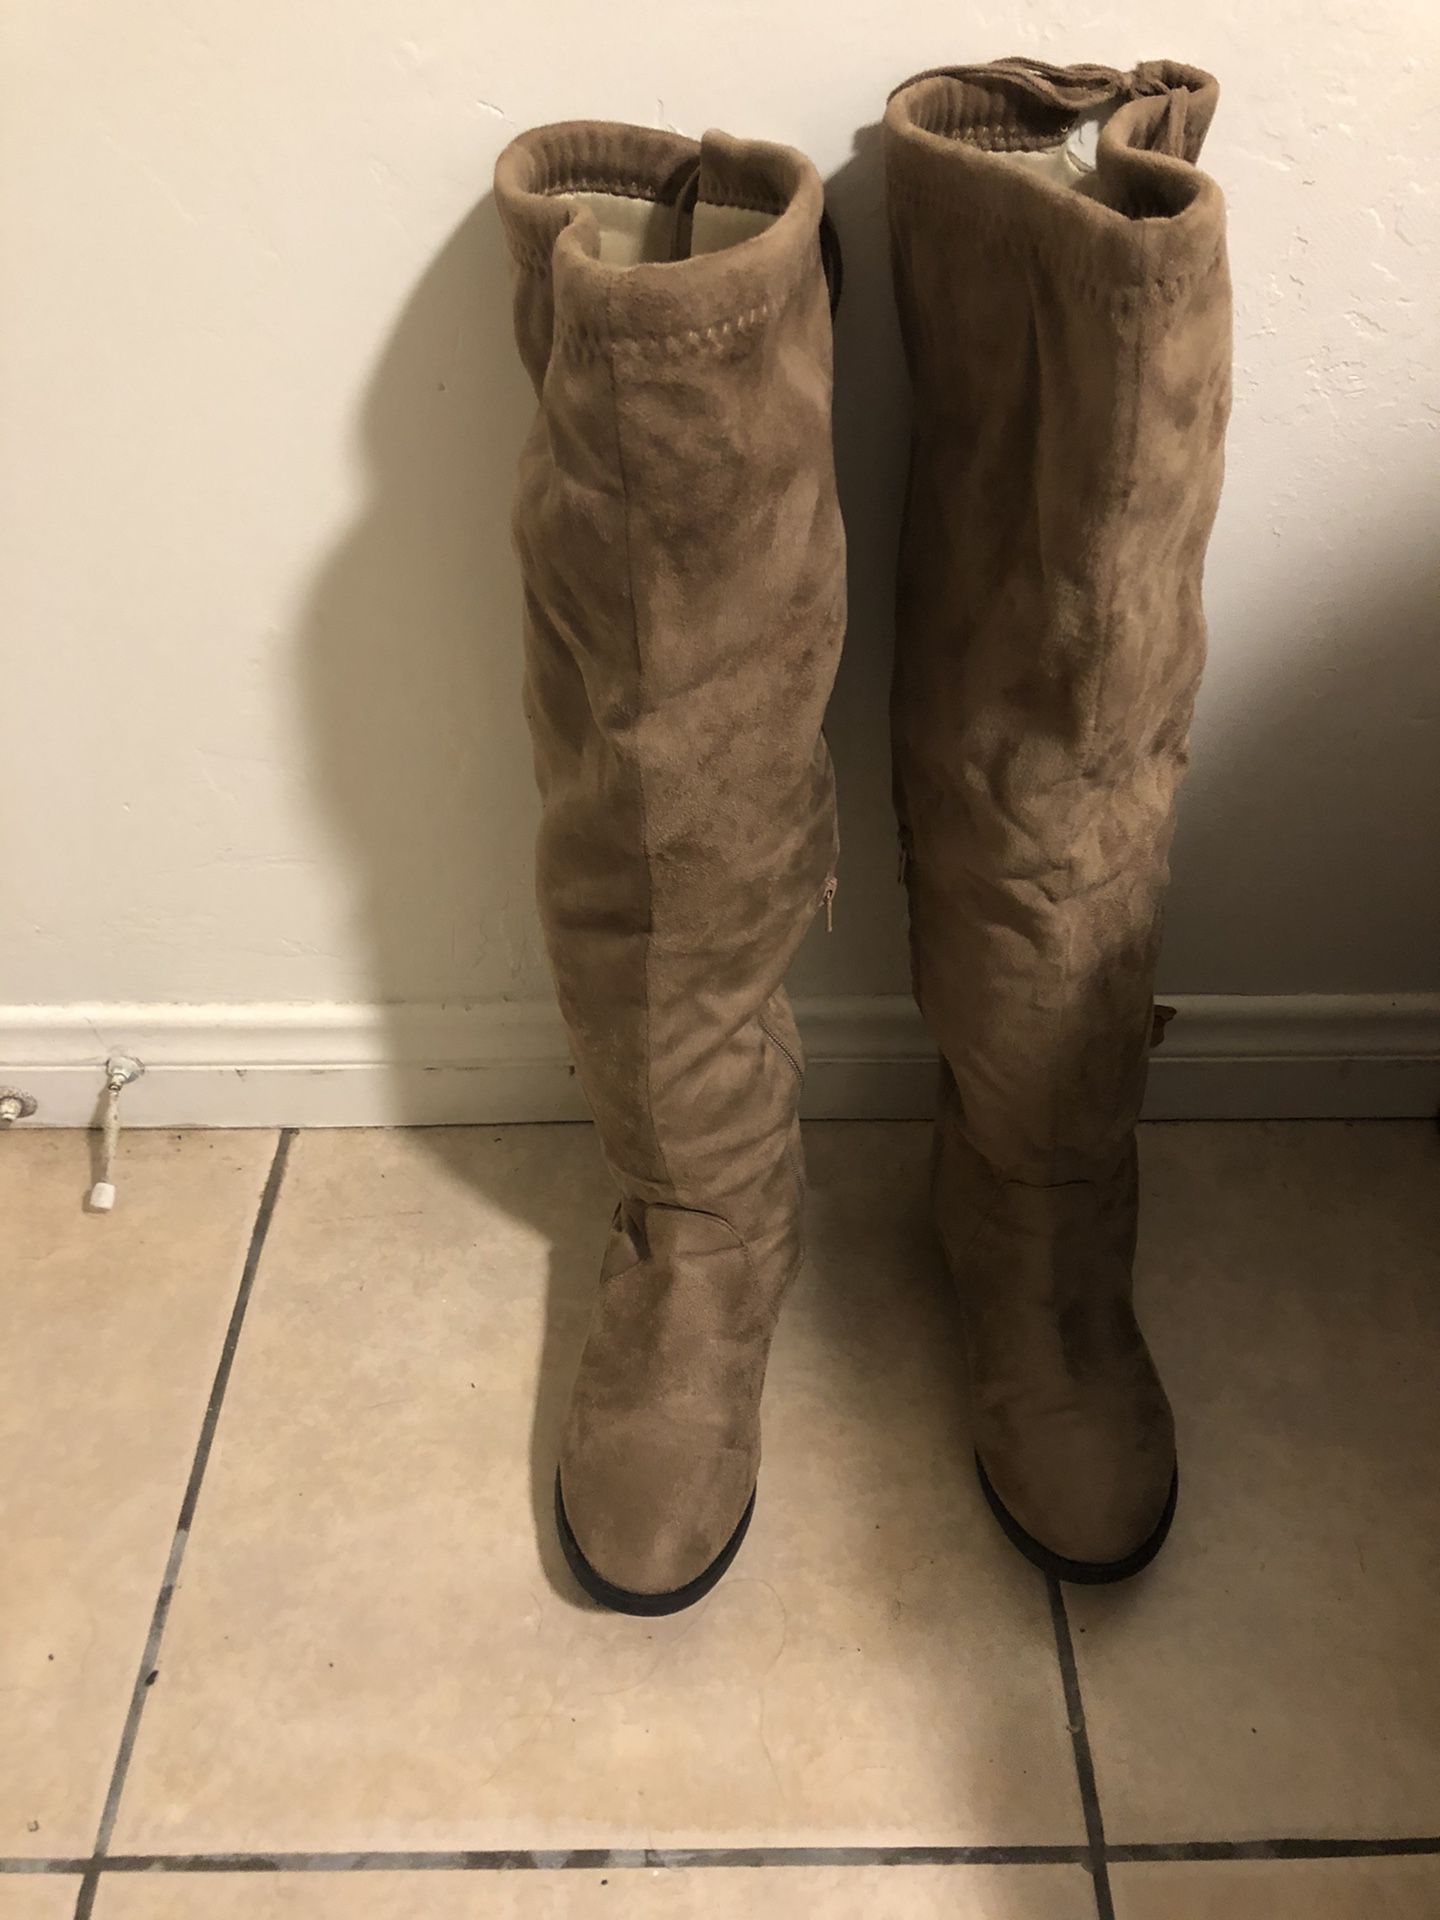 Charlotte Russe Boots 👢 like new size 9W